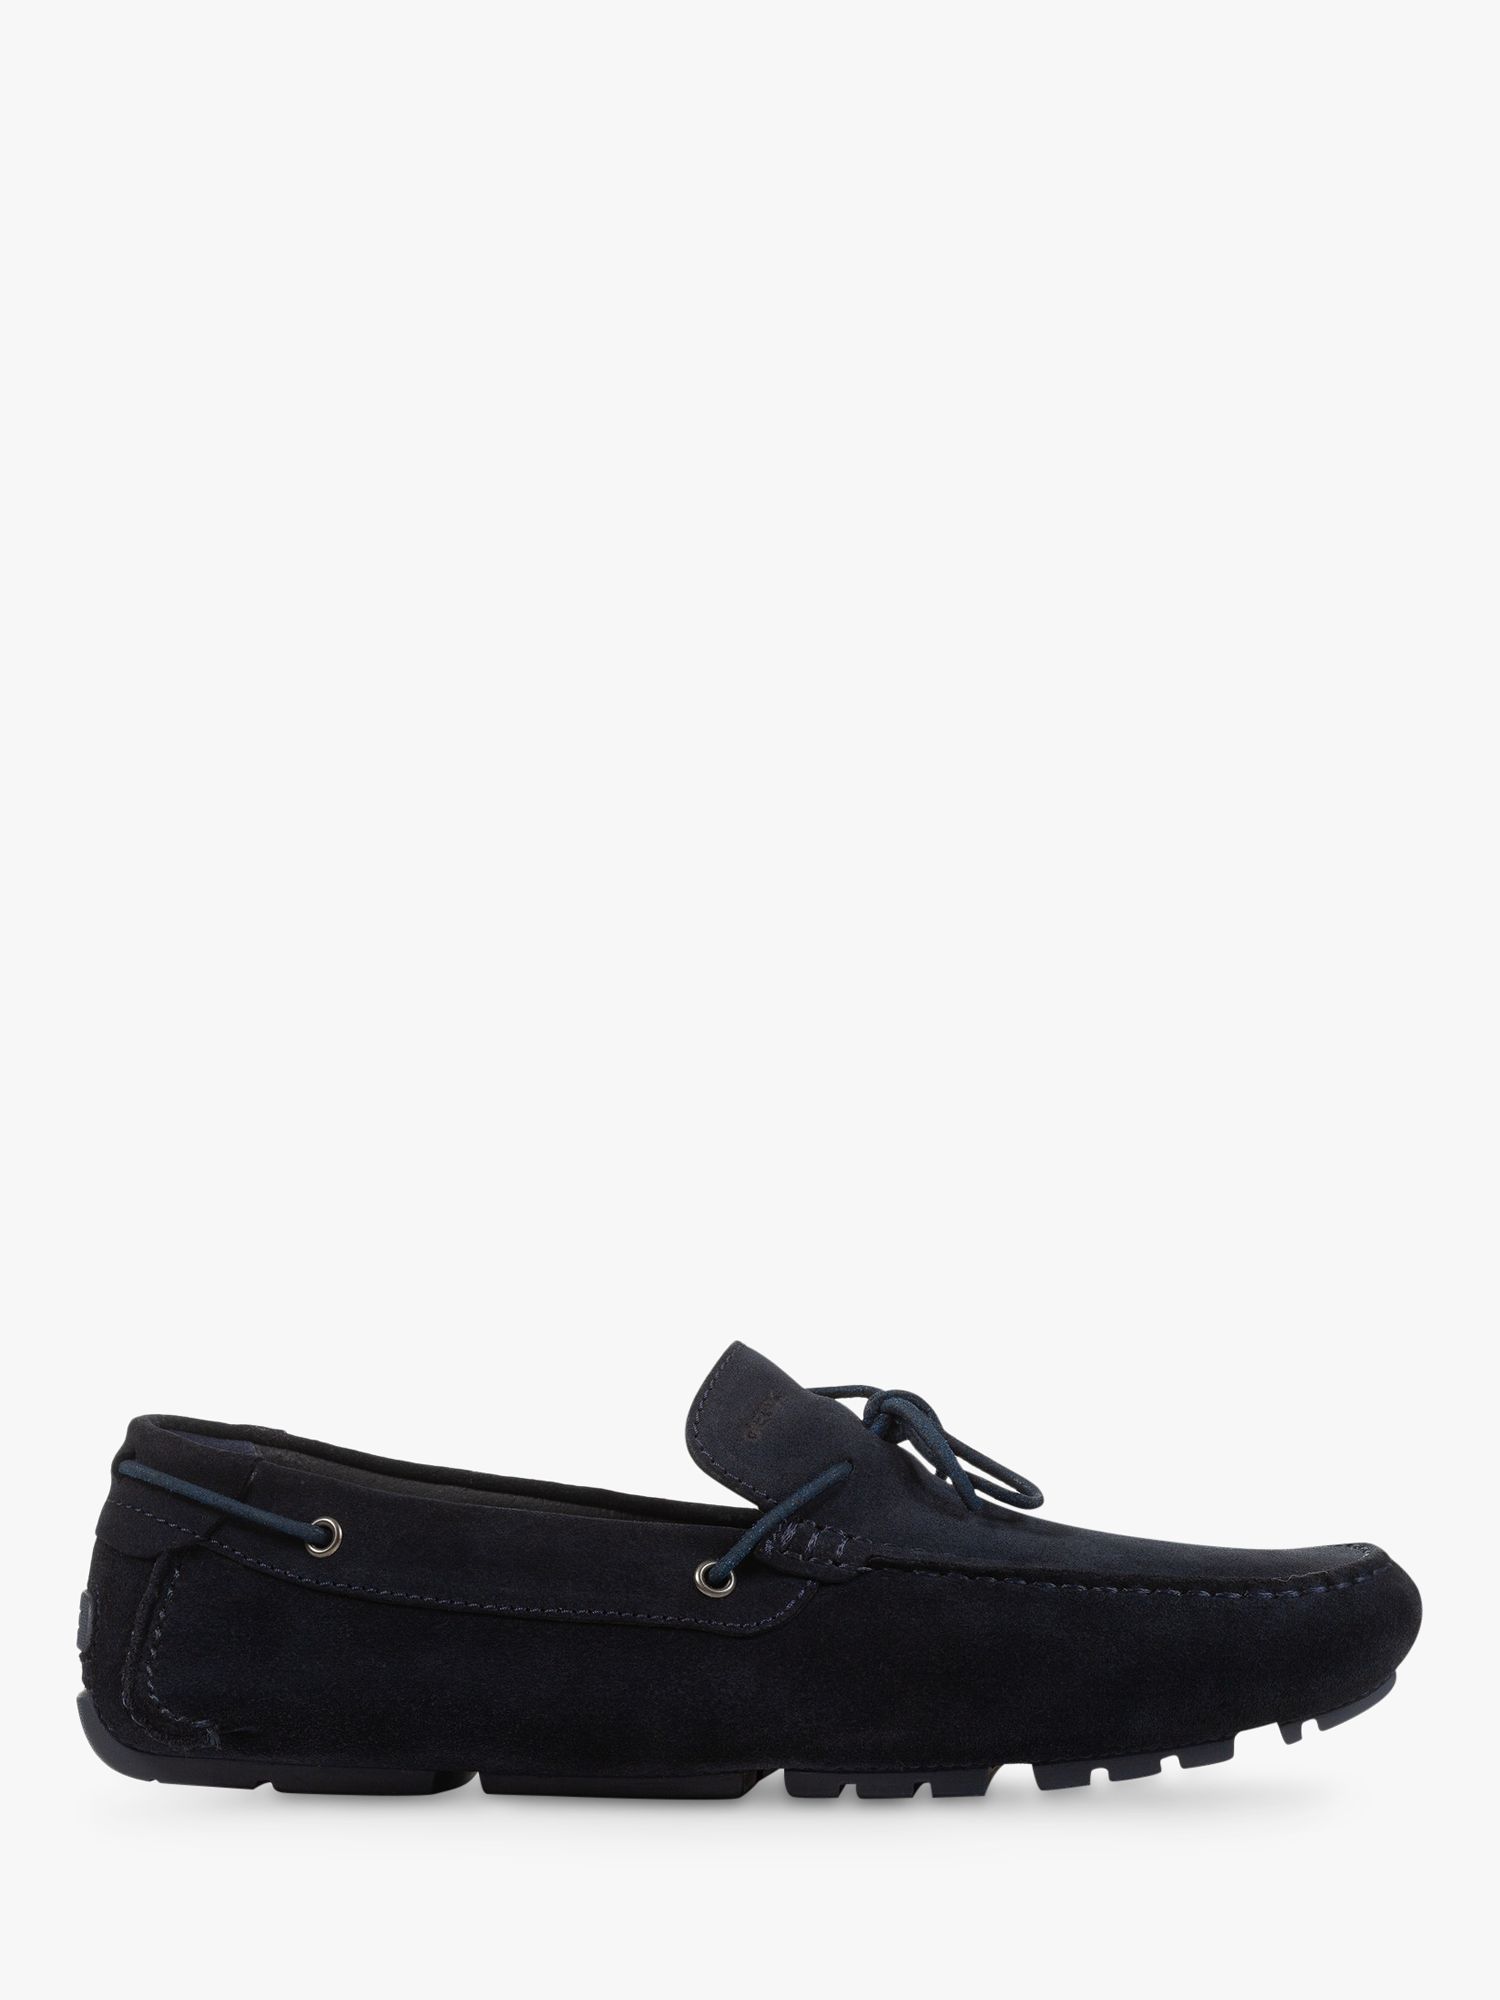 Geox Melbourne Leather Moccasins, Navy